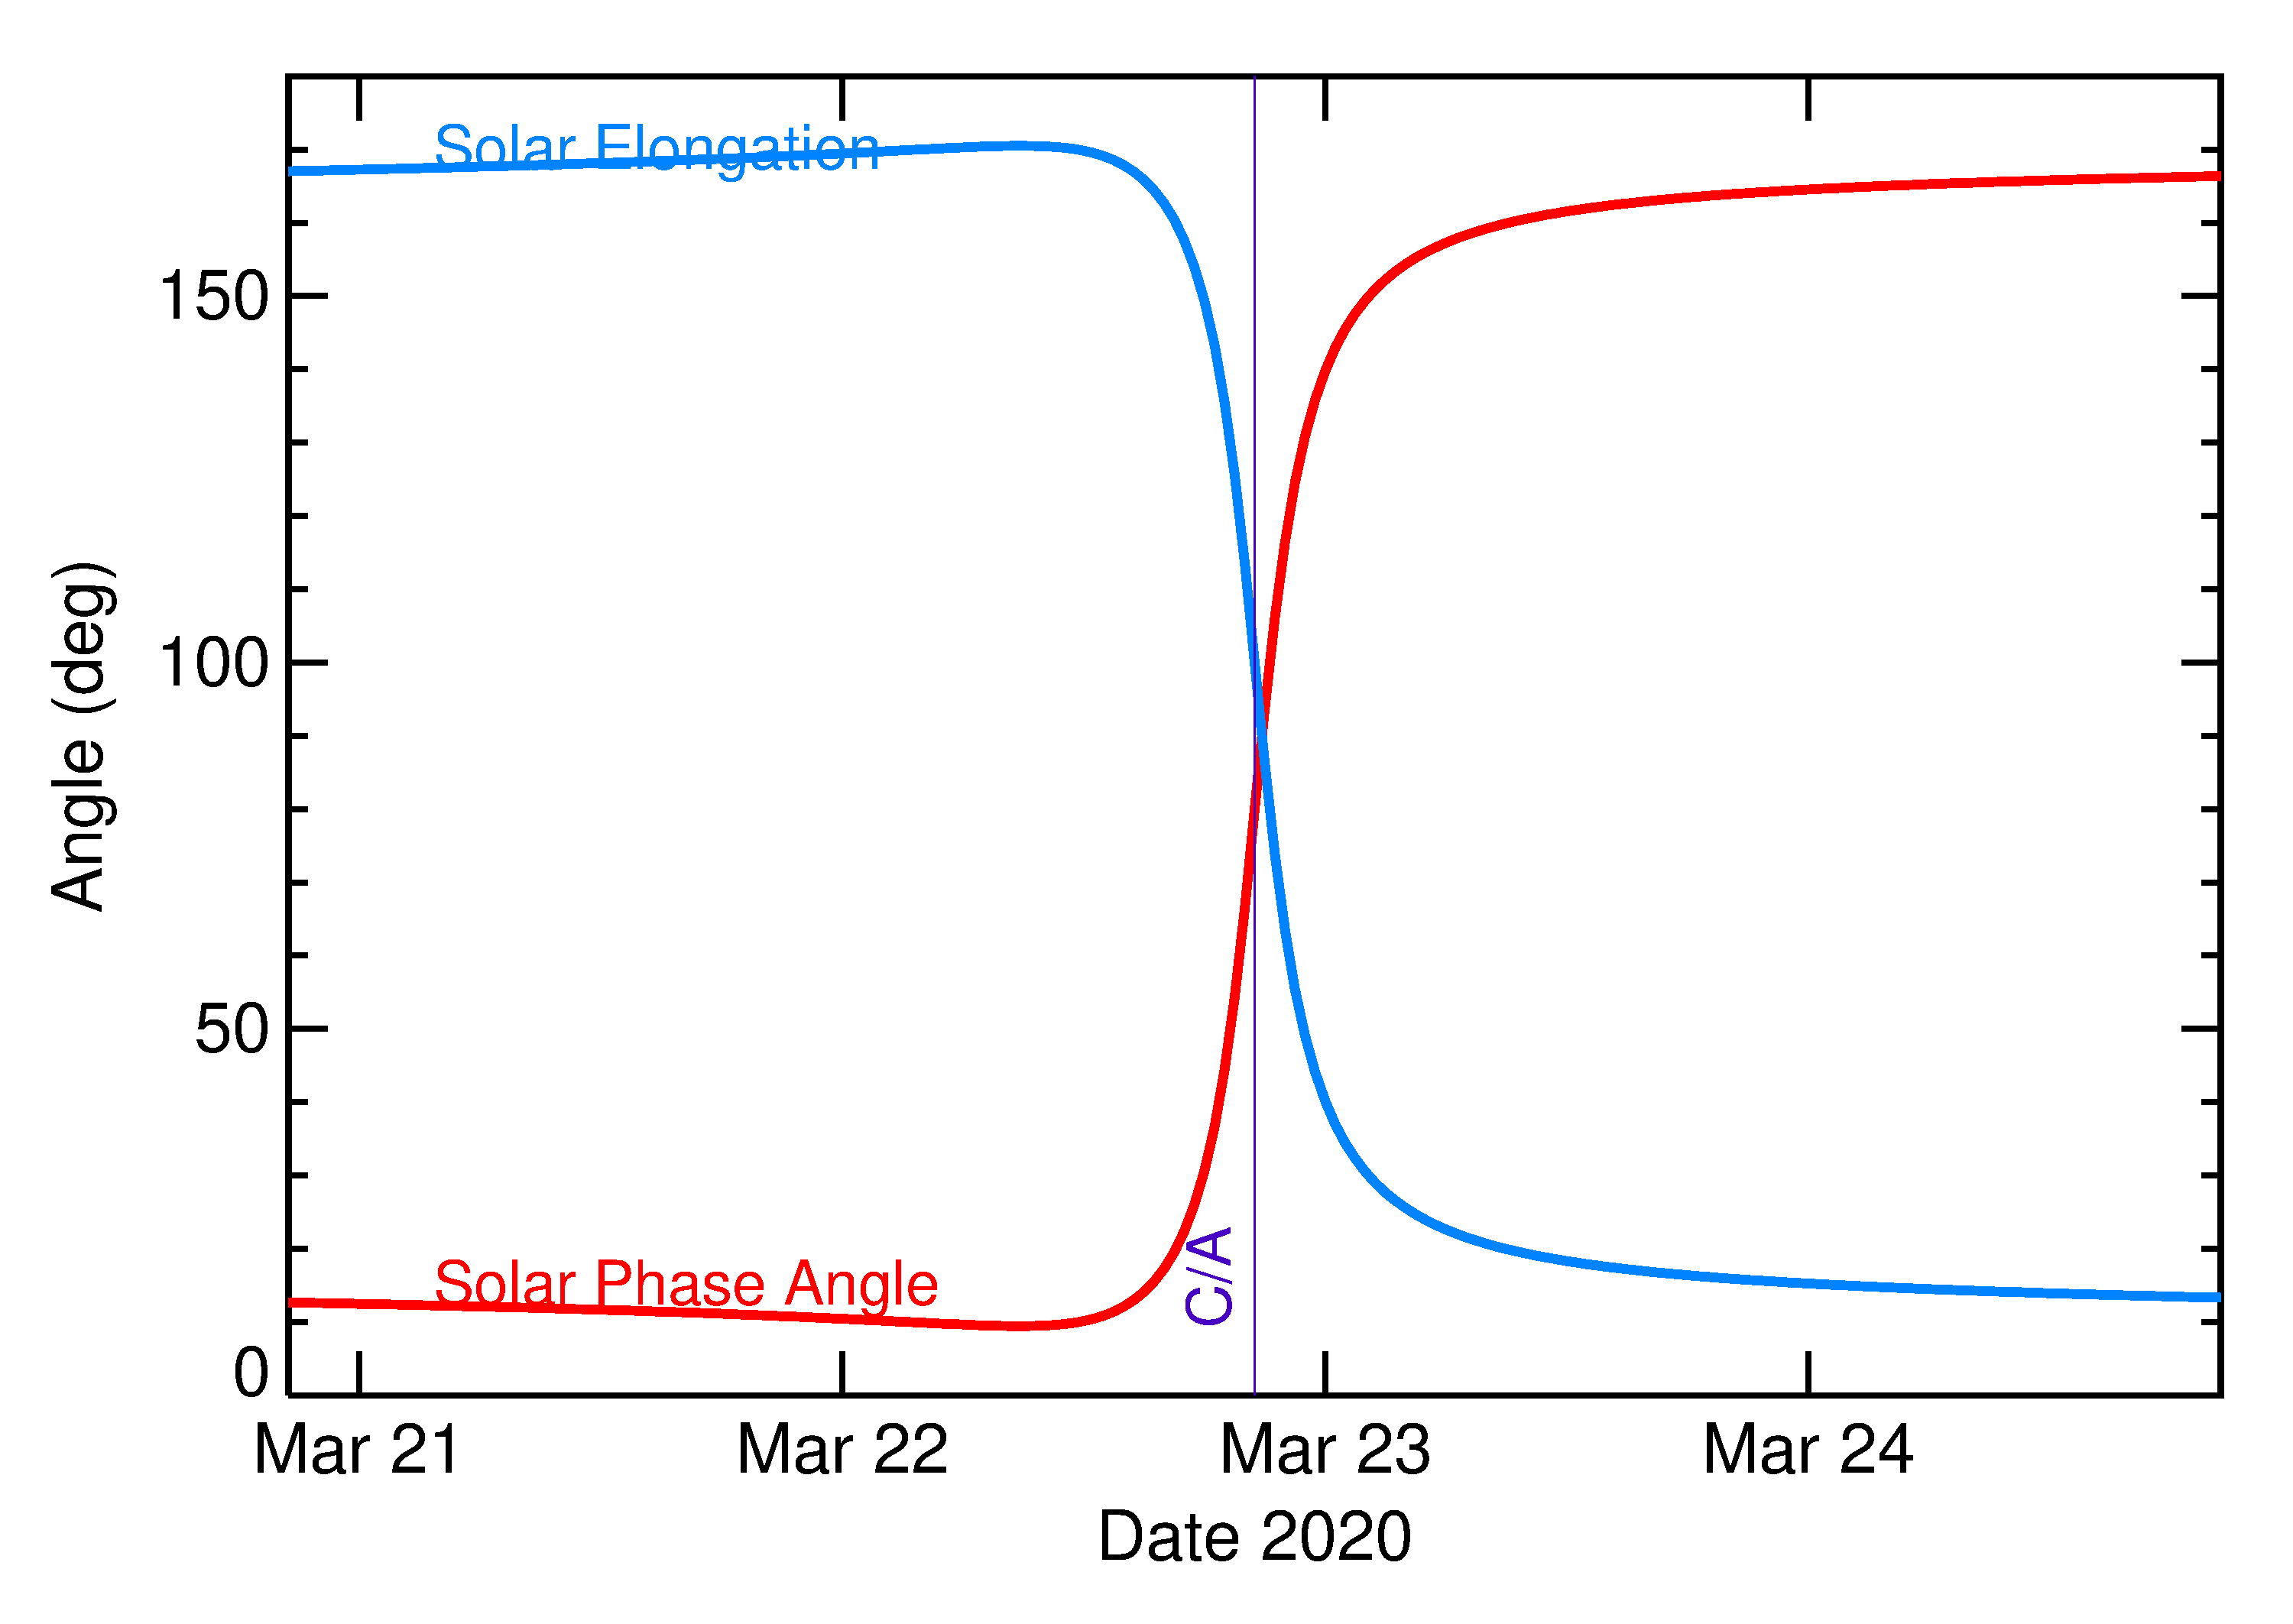 Solar Elongation and Solar Phase Angle of 2020 FL2 in the days around closest approach